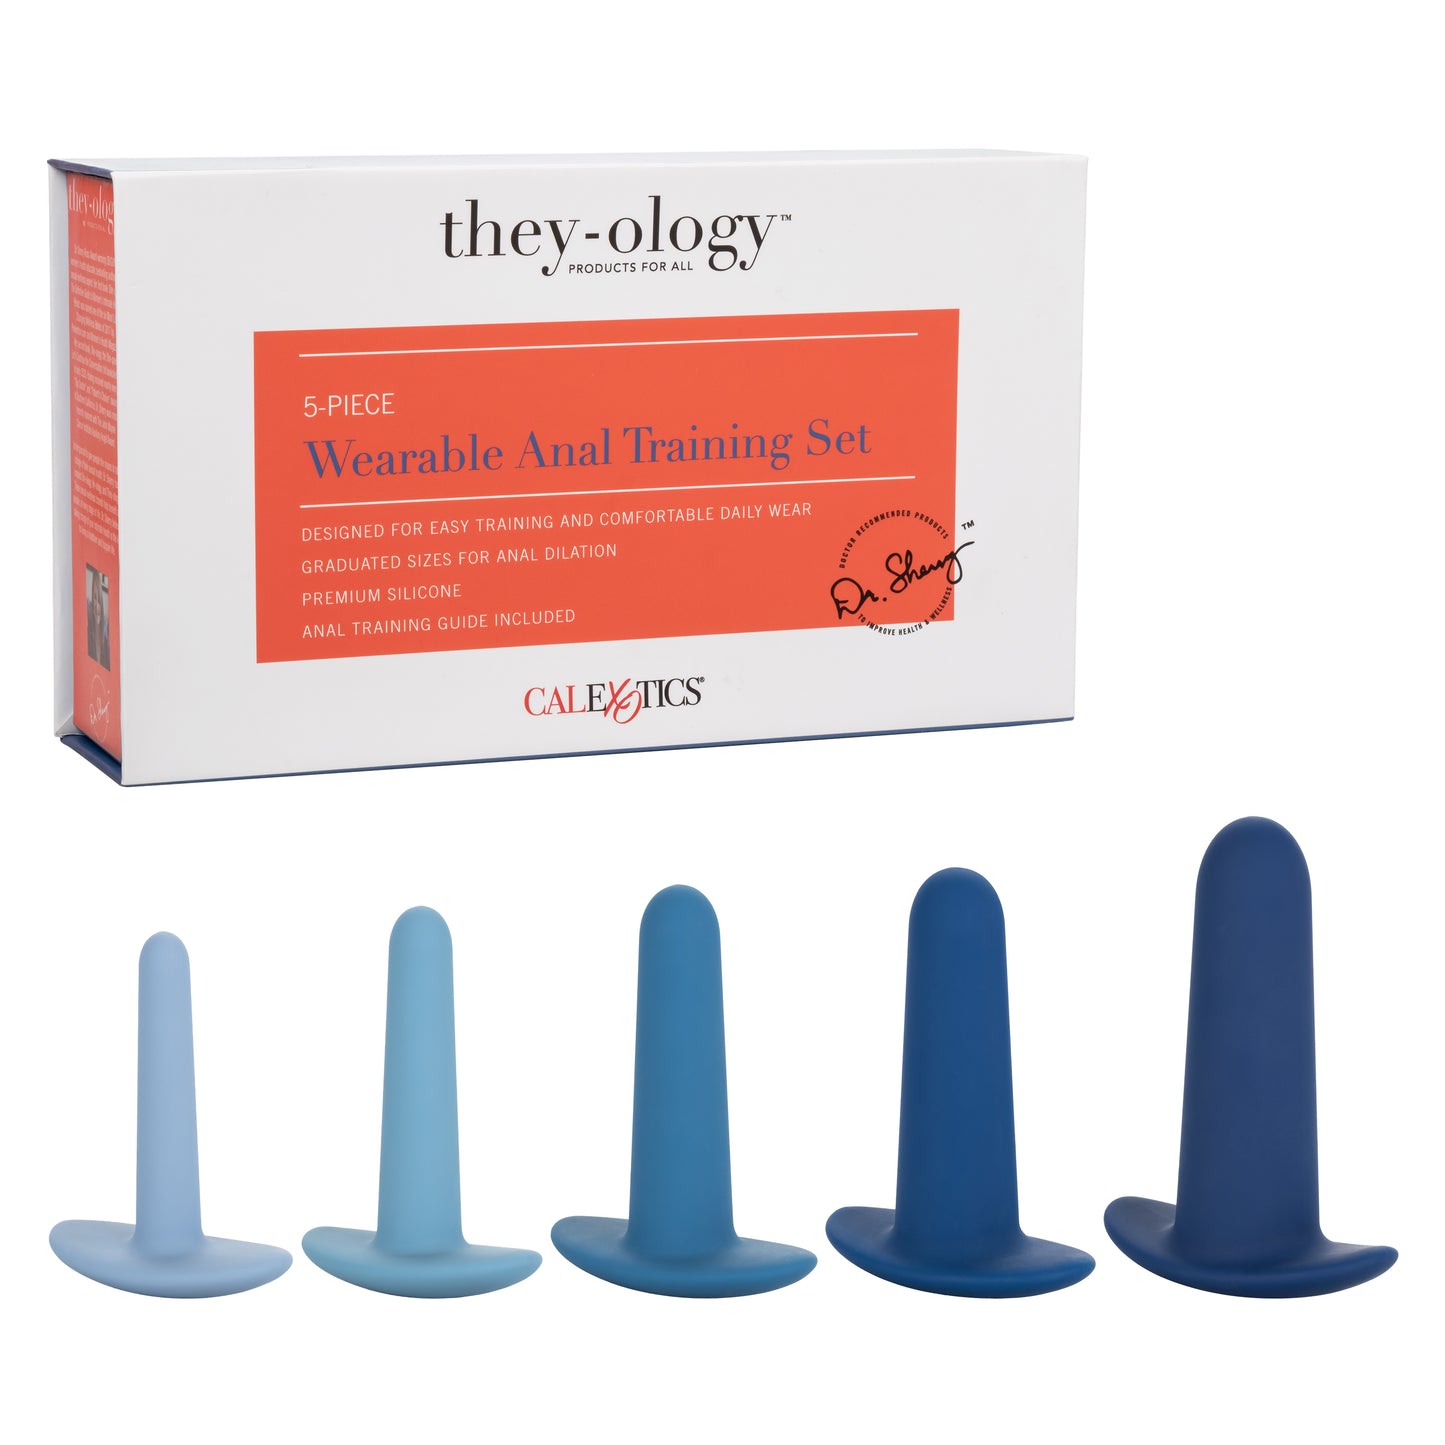 They-ology Wearable Anal Trainer Set